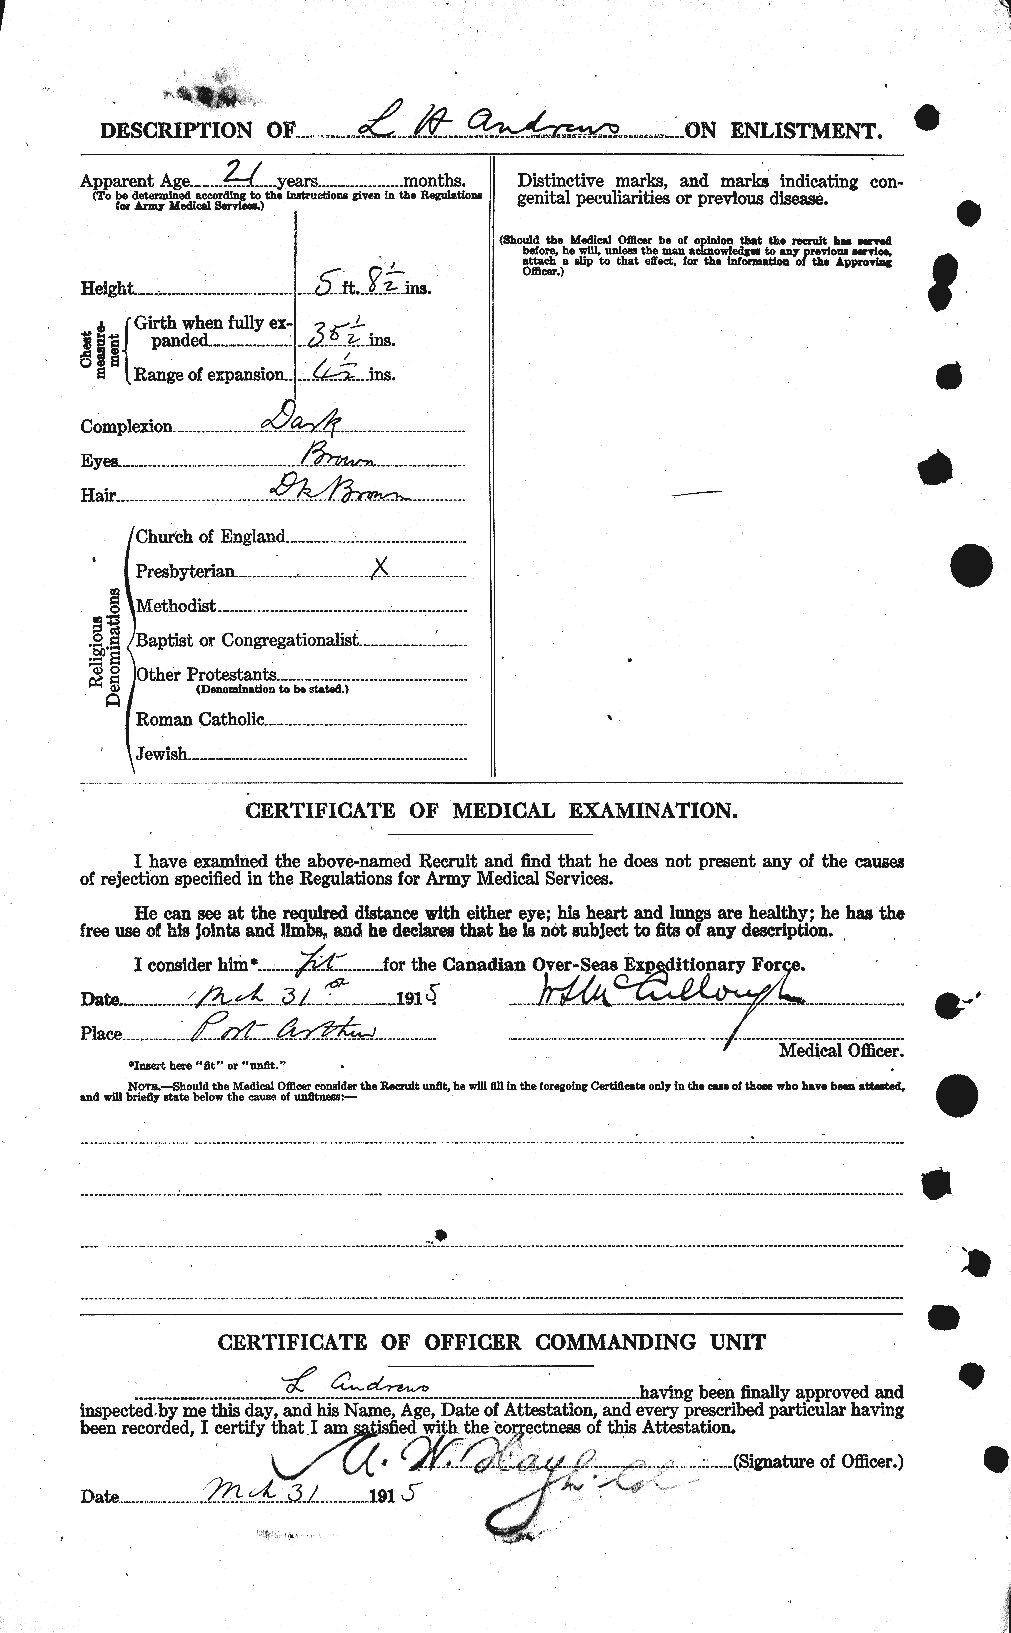 Personnel Records of the First World War - CEF 210172b